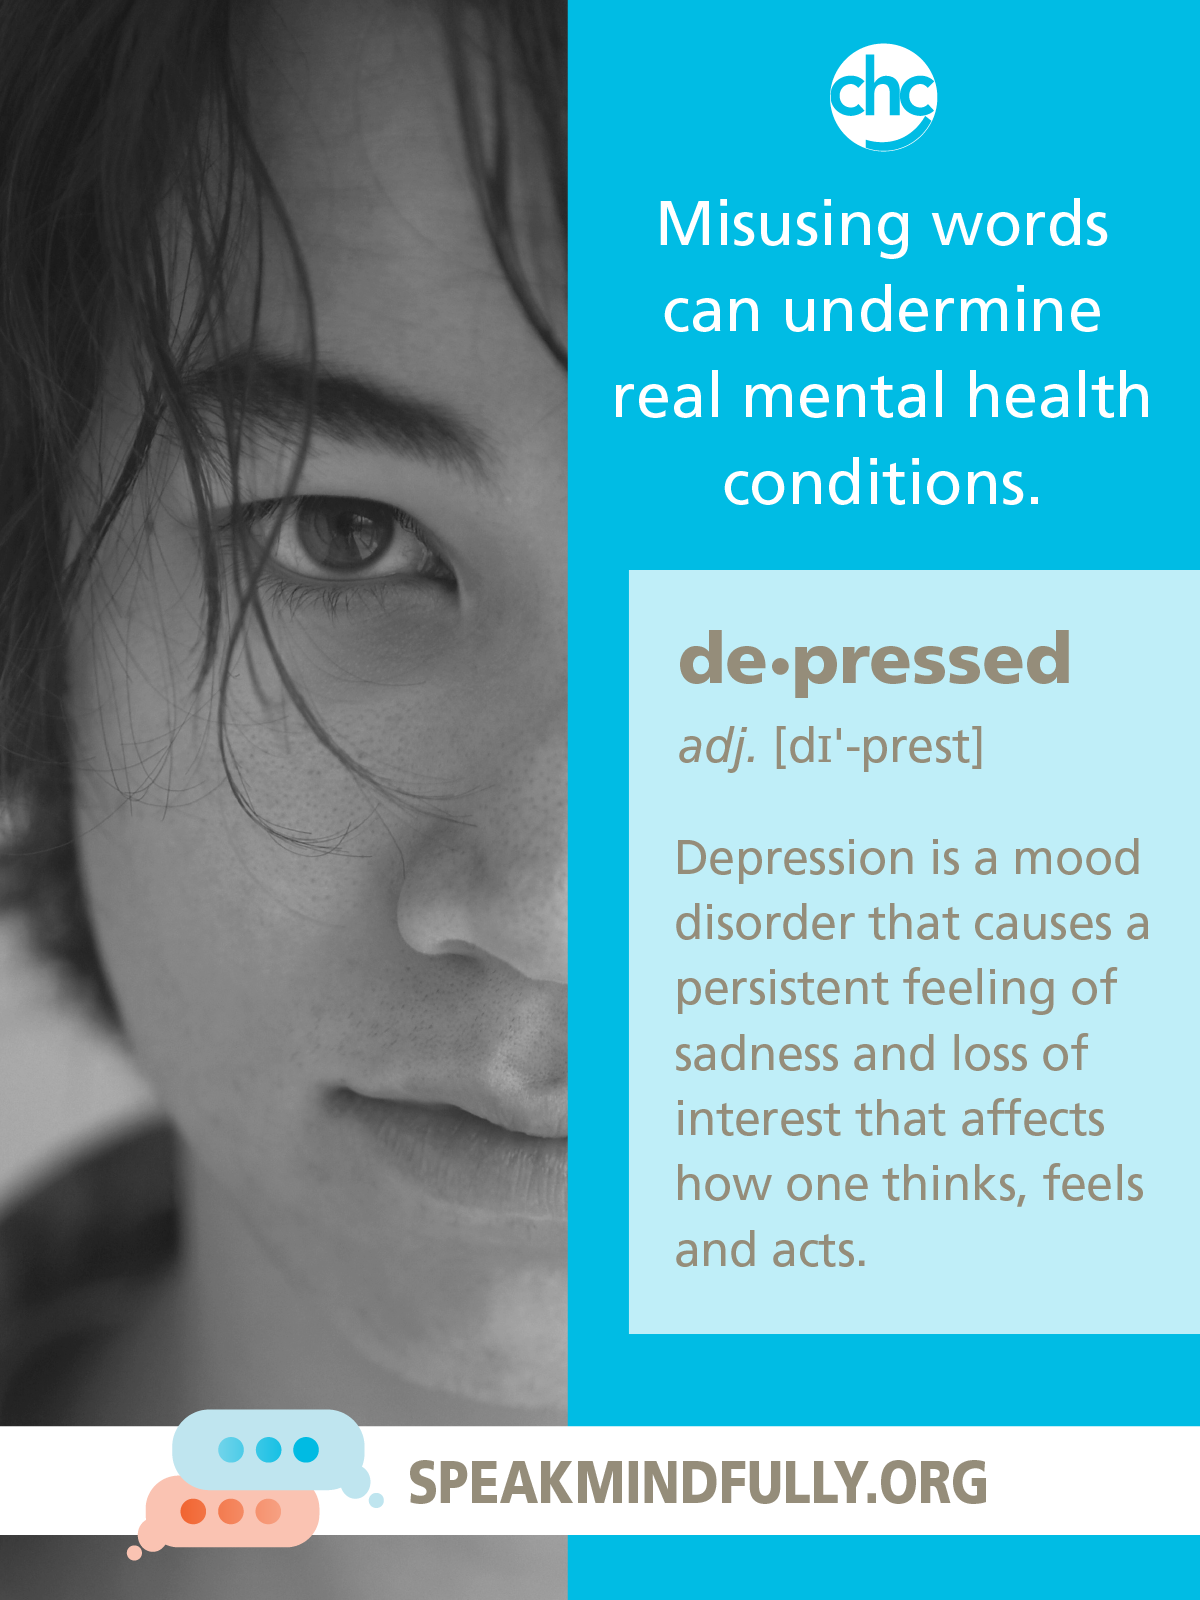 Speak Mindfully poster about Depression